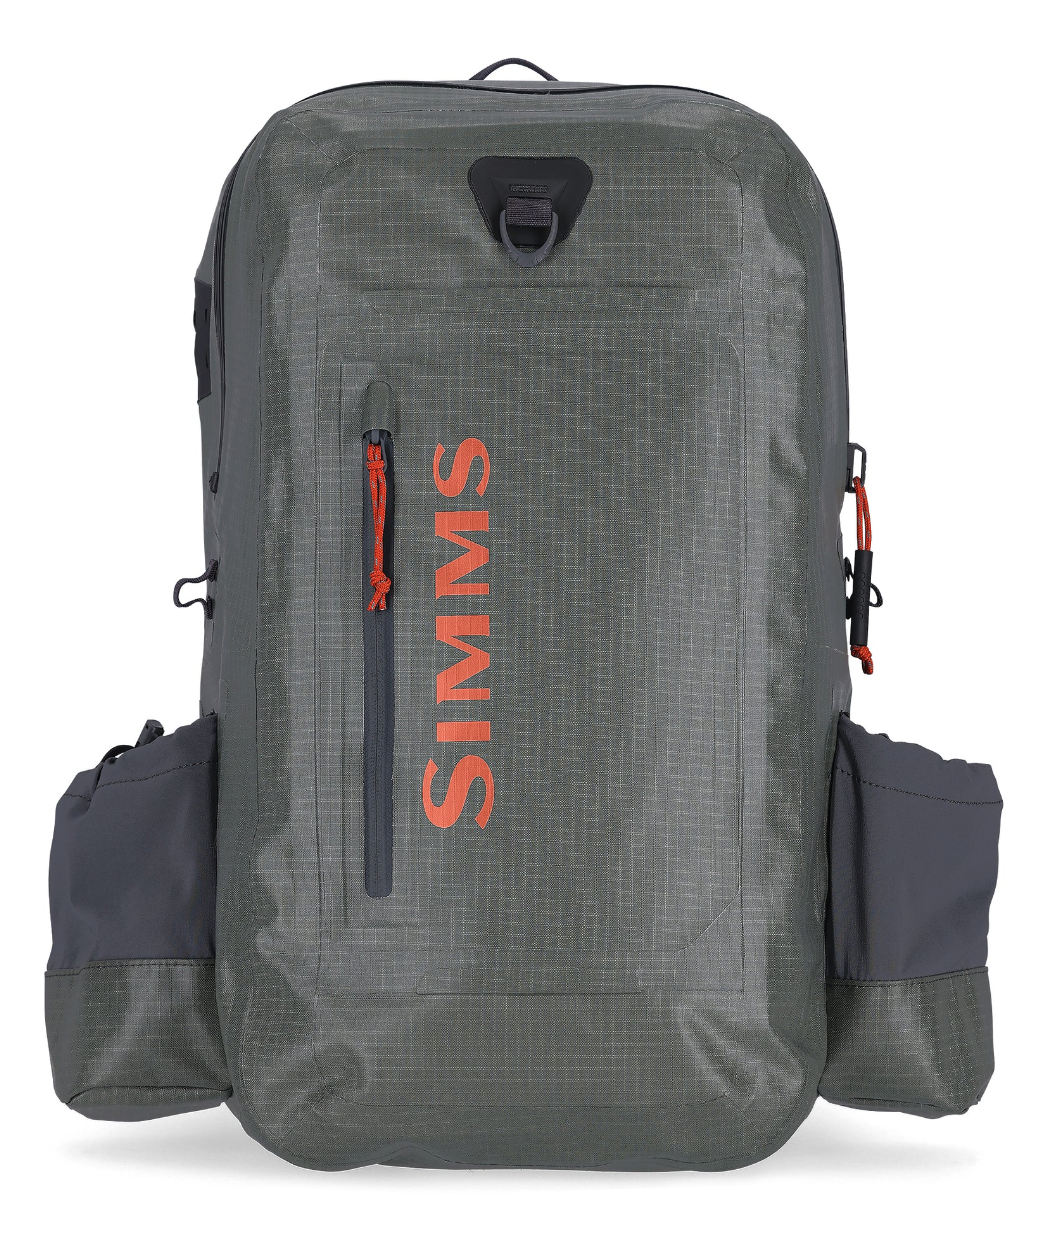 https://www.theflyfishers.com/Content/files/Simms/DryCreek/Backpack13464/Olive.png